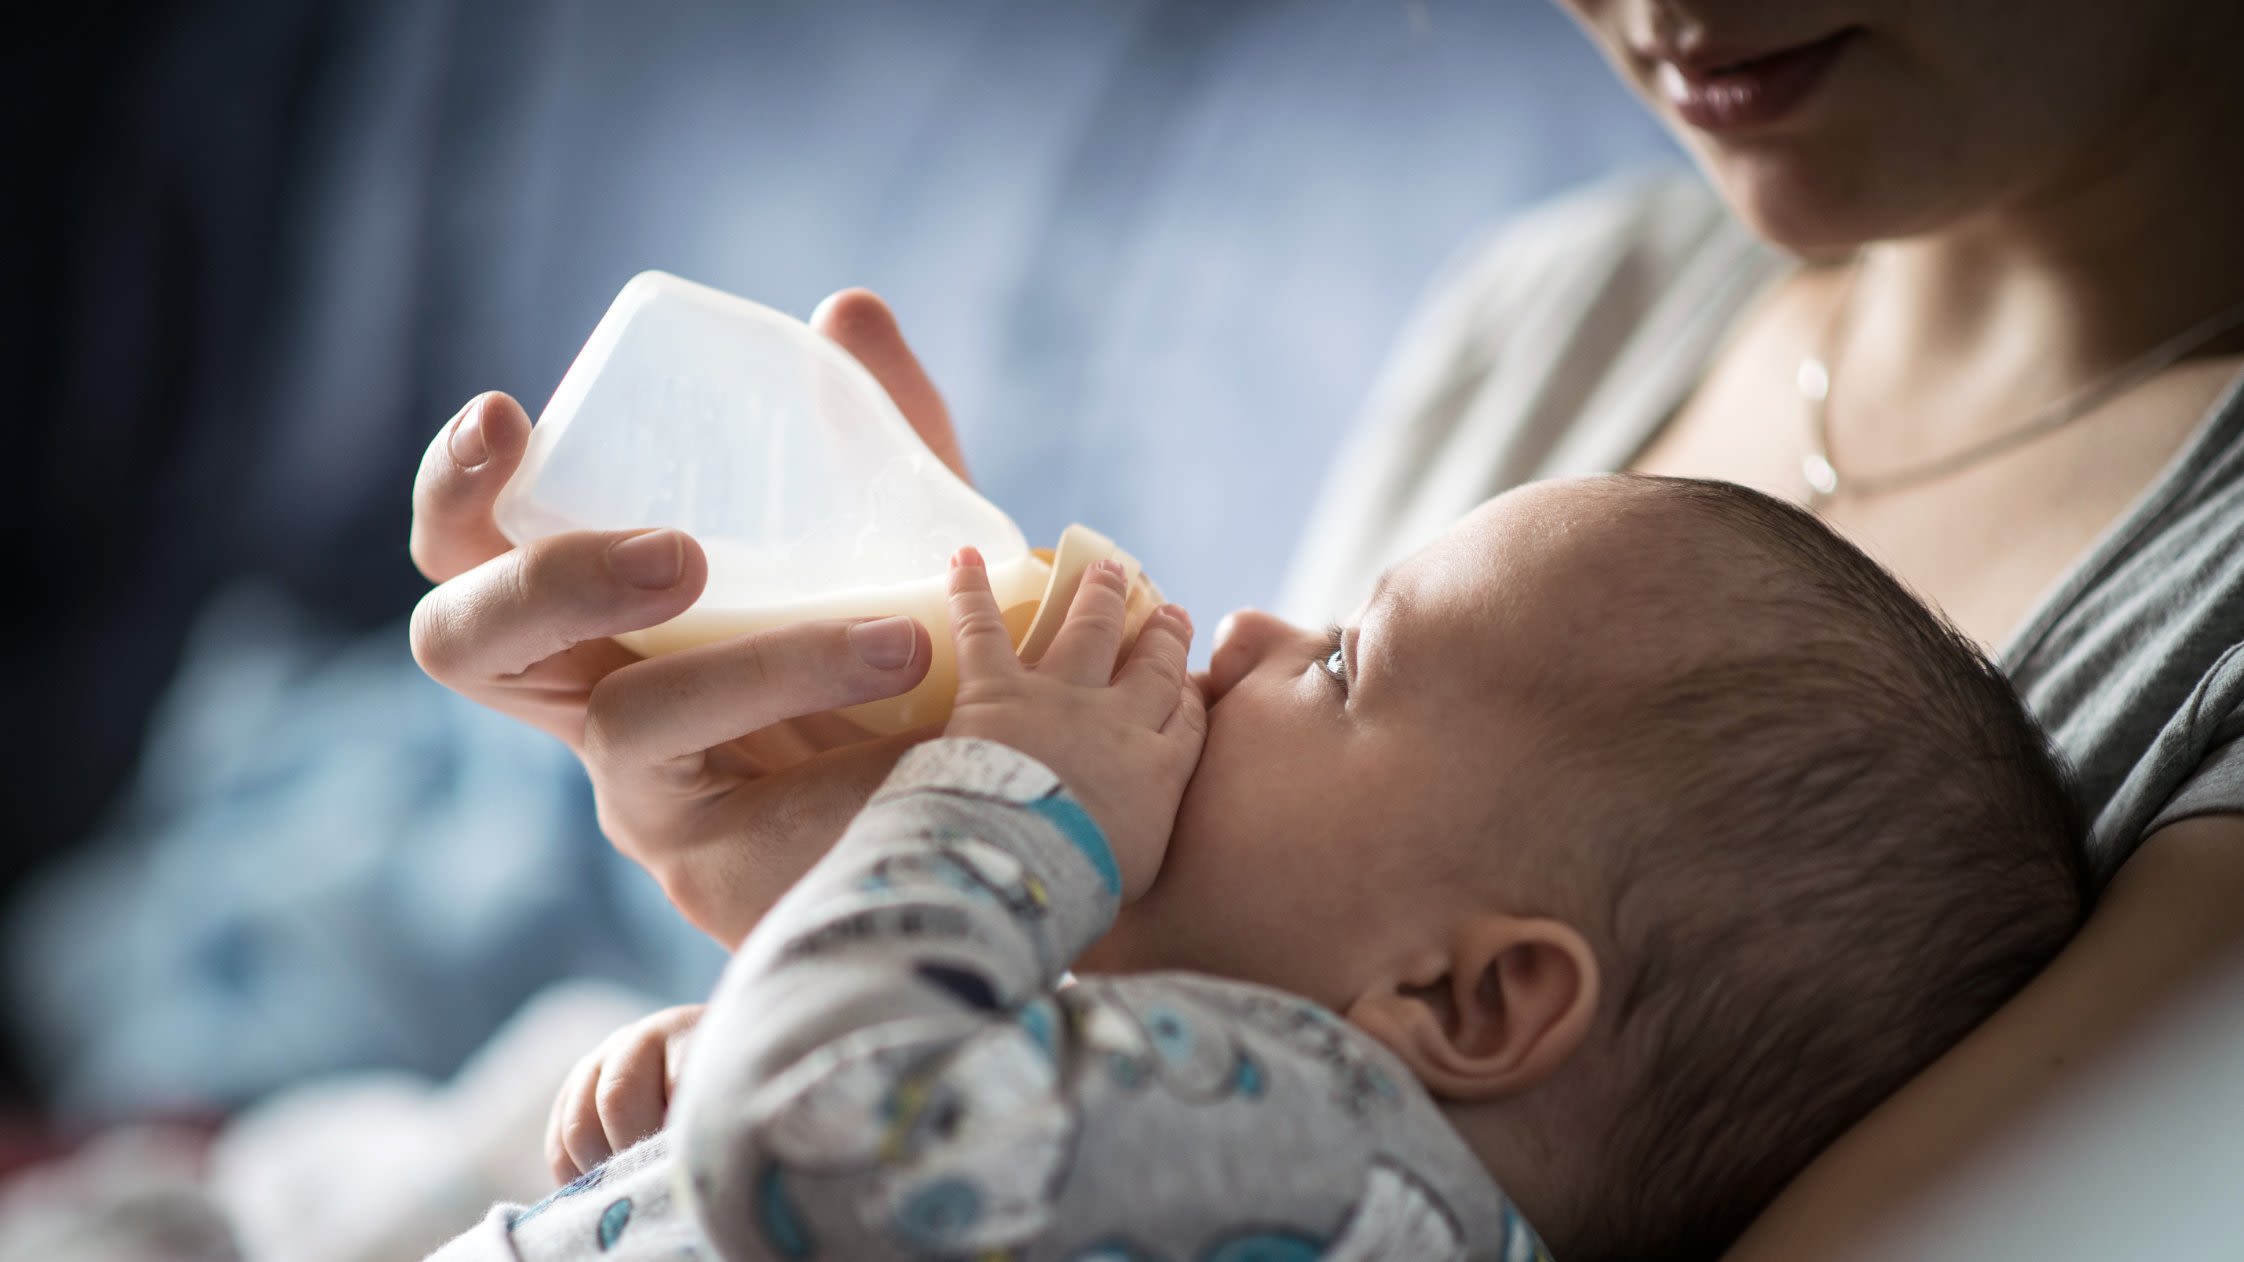 Buying human breast milk online poses serious health risk, say experts, Breastfeeding